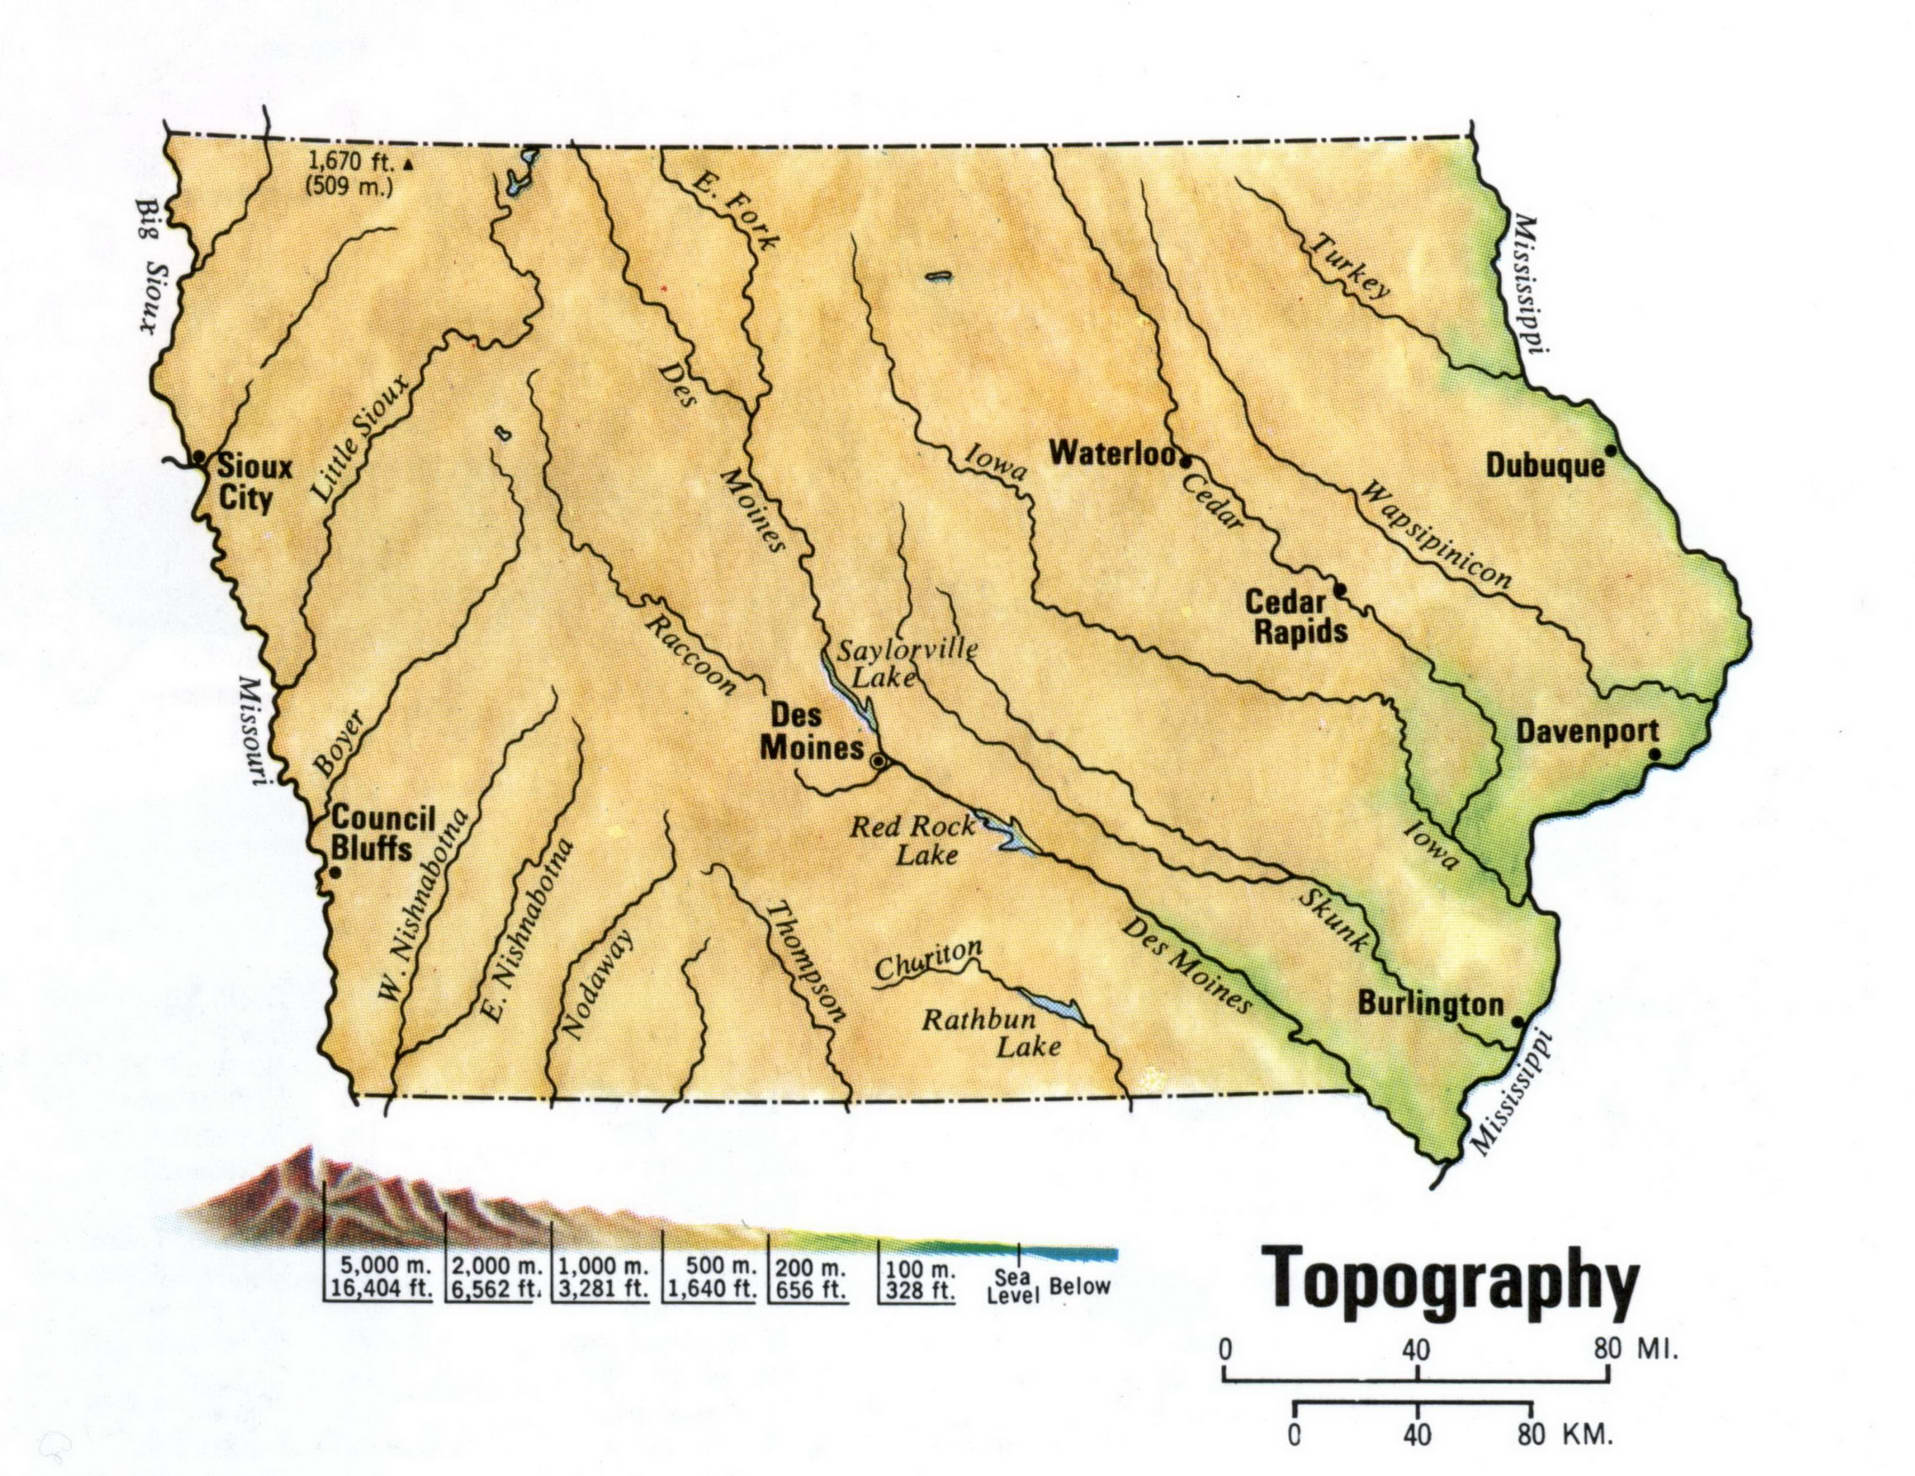 Topographical map of Iowa